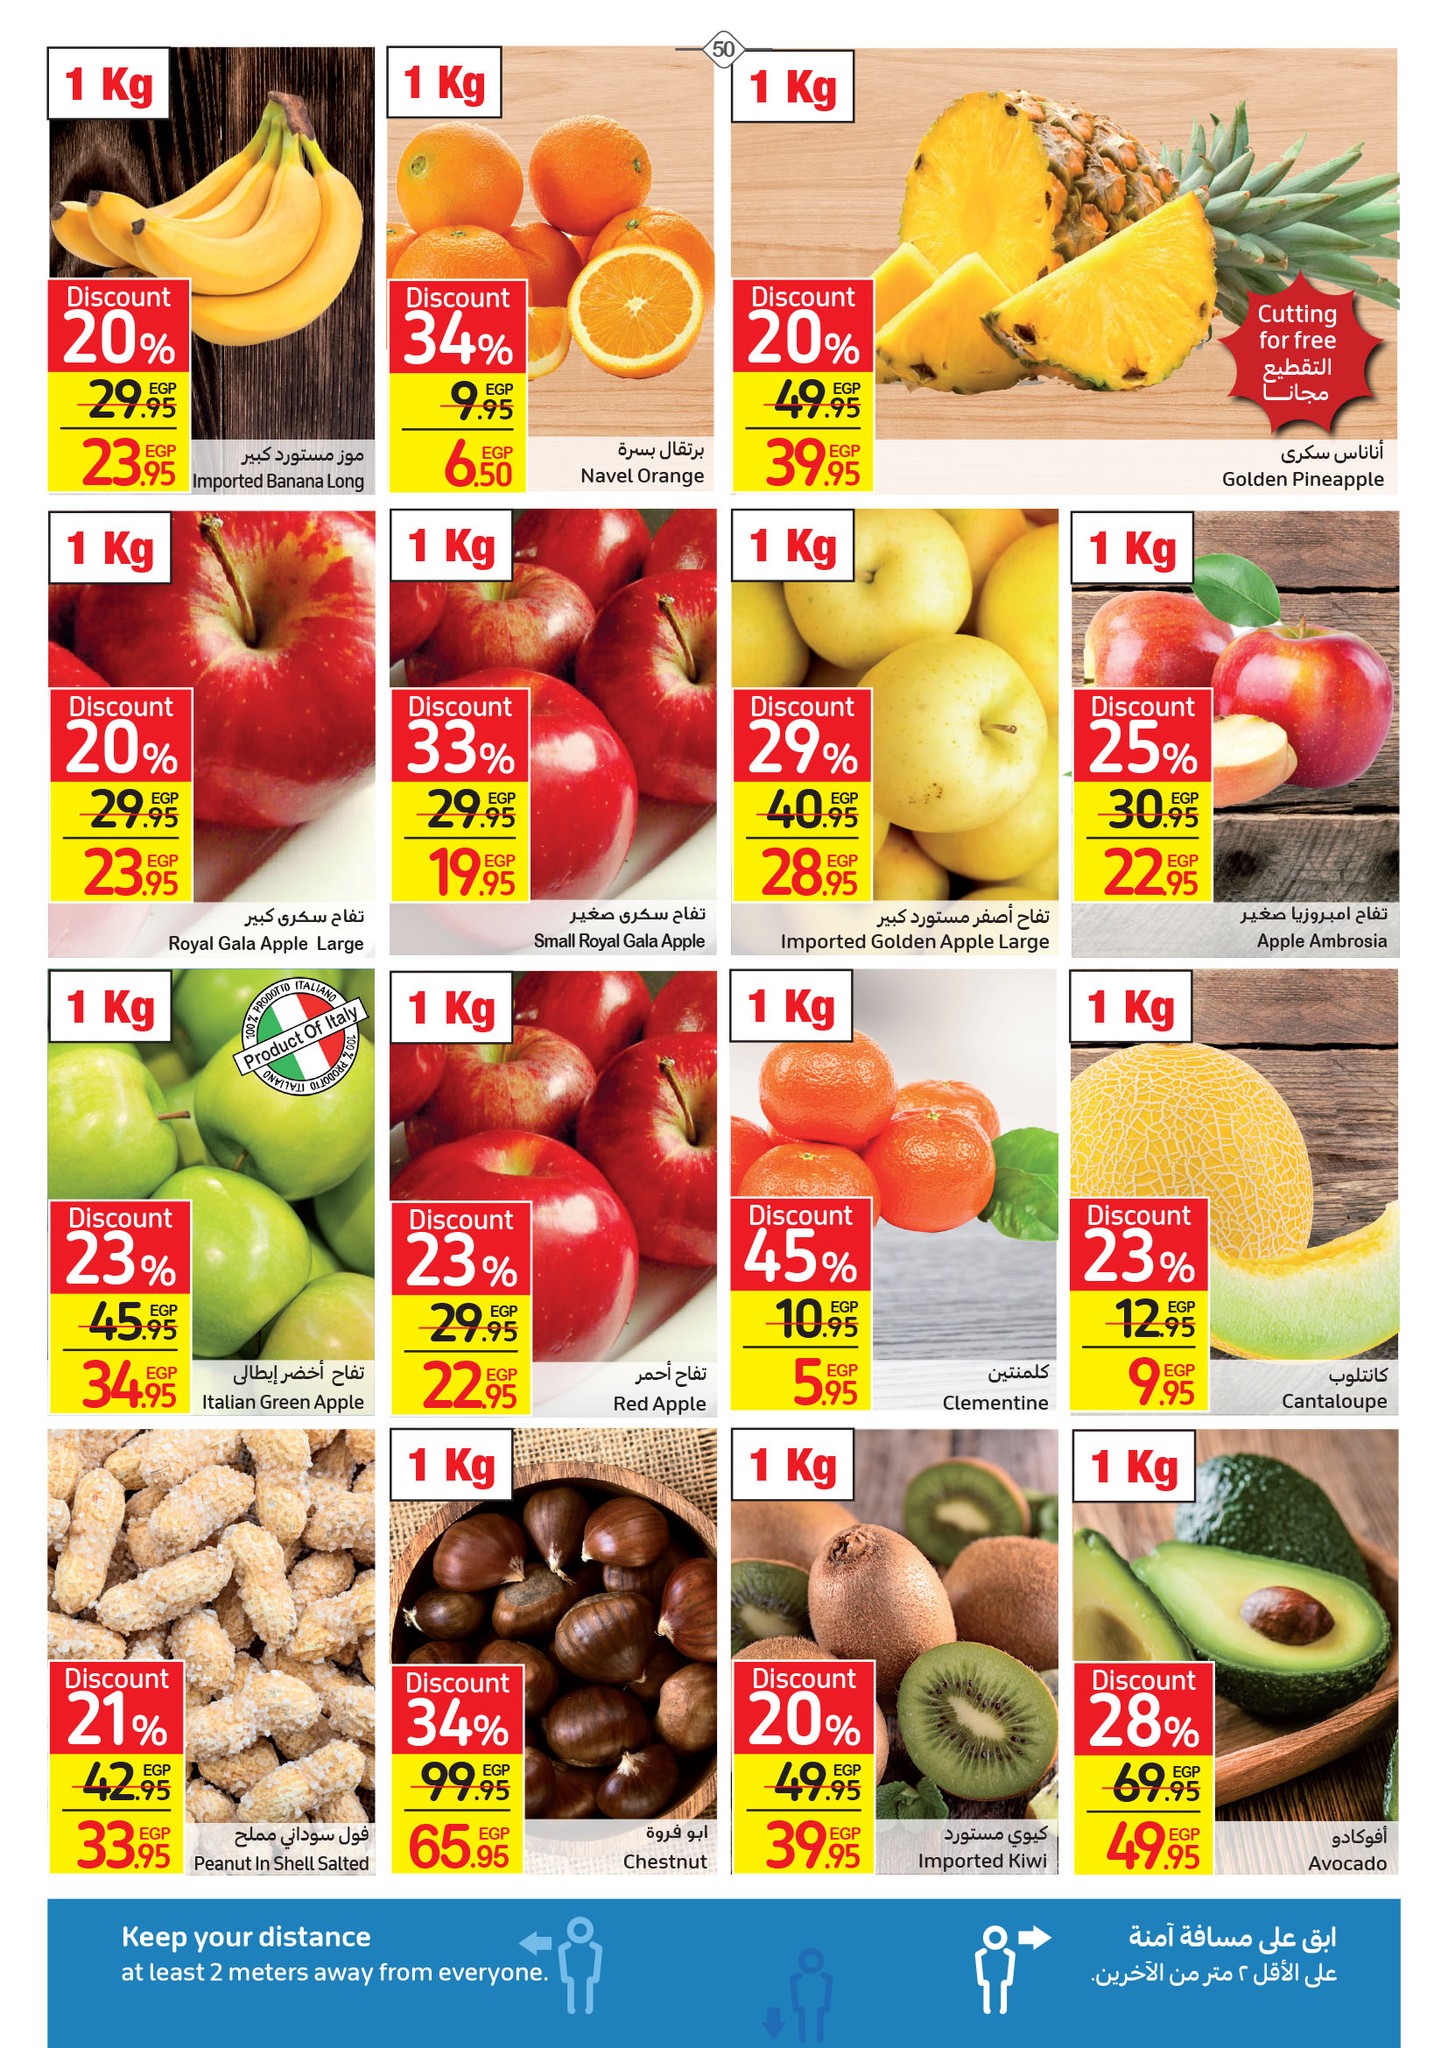 Watch the latest Carrefour half price offers "Last Chance Offer" until December 4th 50